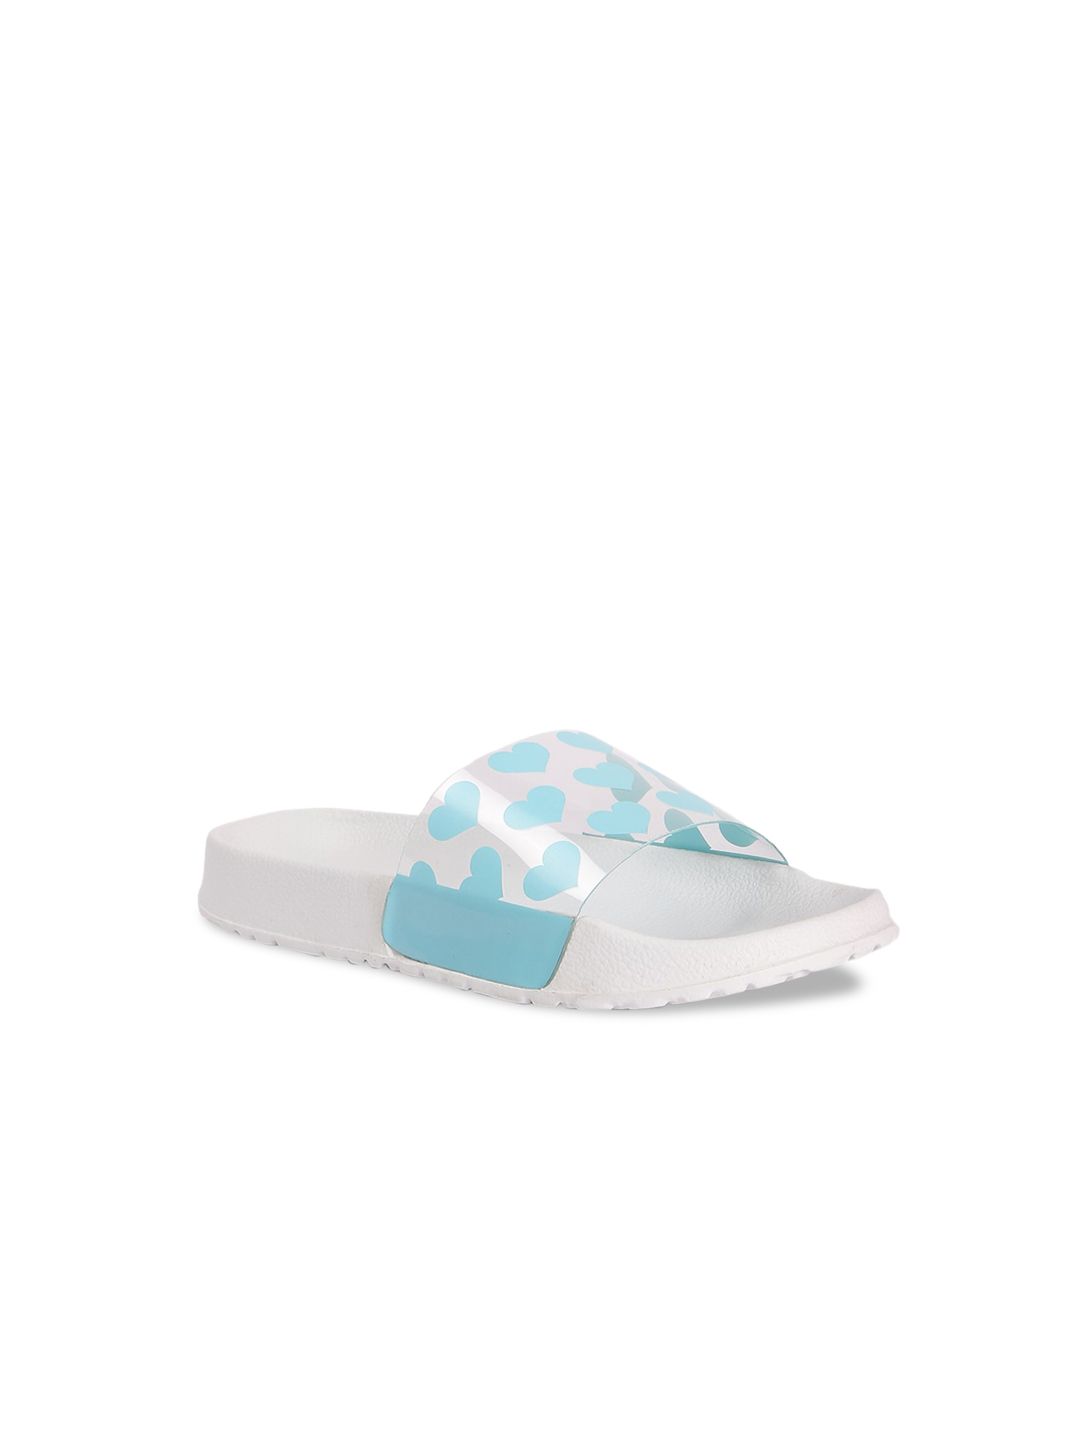 FOREVER 21 Women White & Turquoise Blue Printed Sliders Price in India